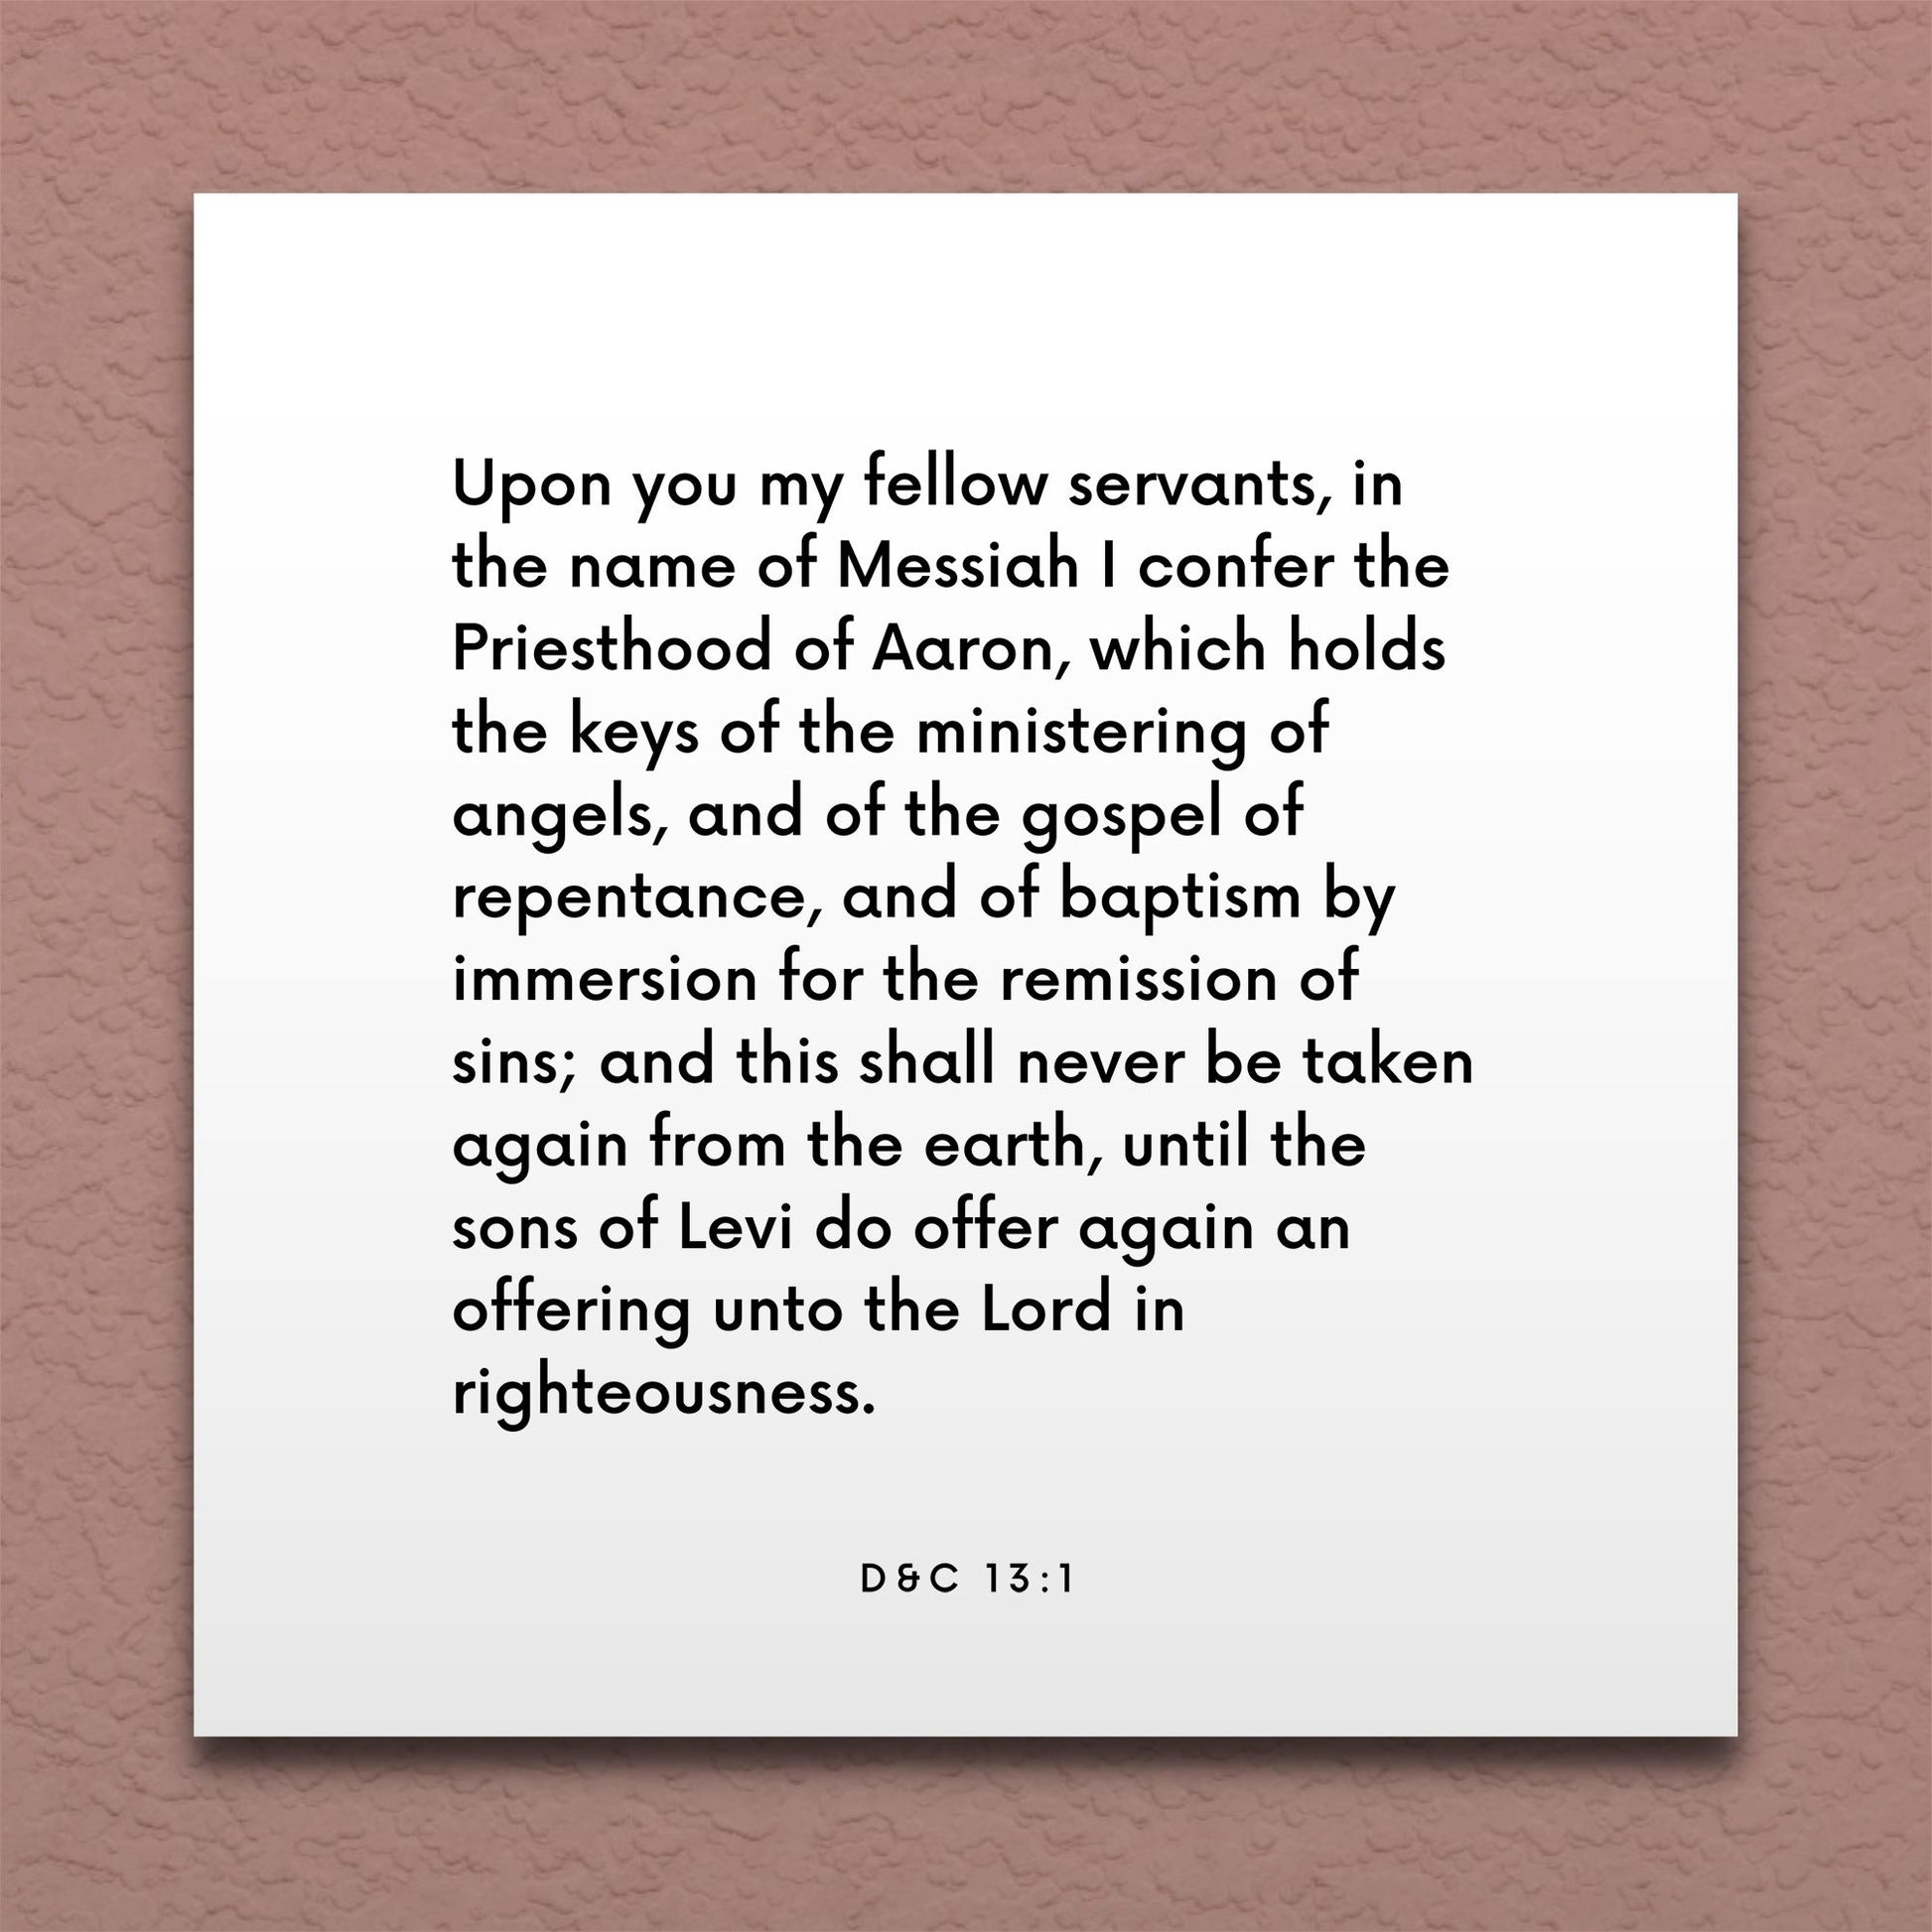 Wall-mounted scripture tile for D&C 13:1 - "Upon you my fellow servants, I confer the Priesthood of Aaron"